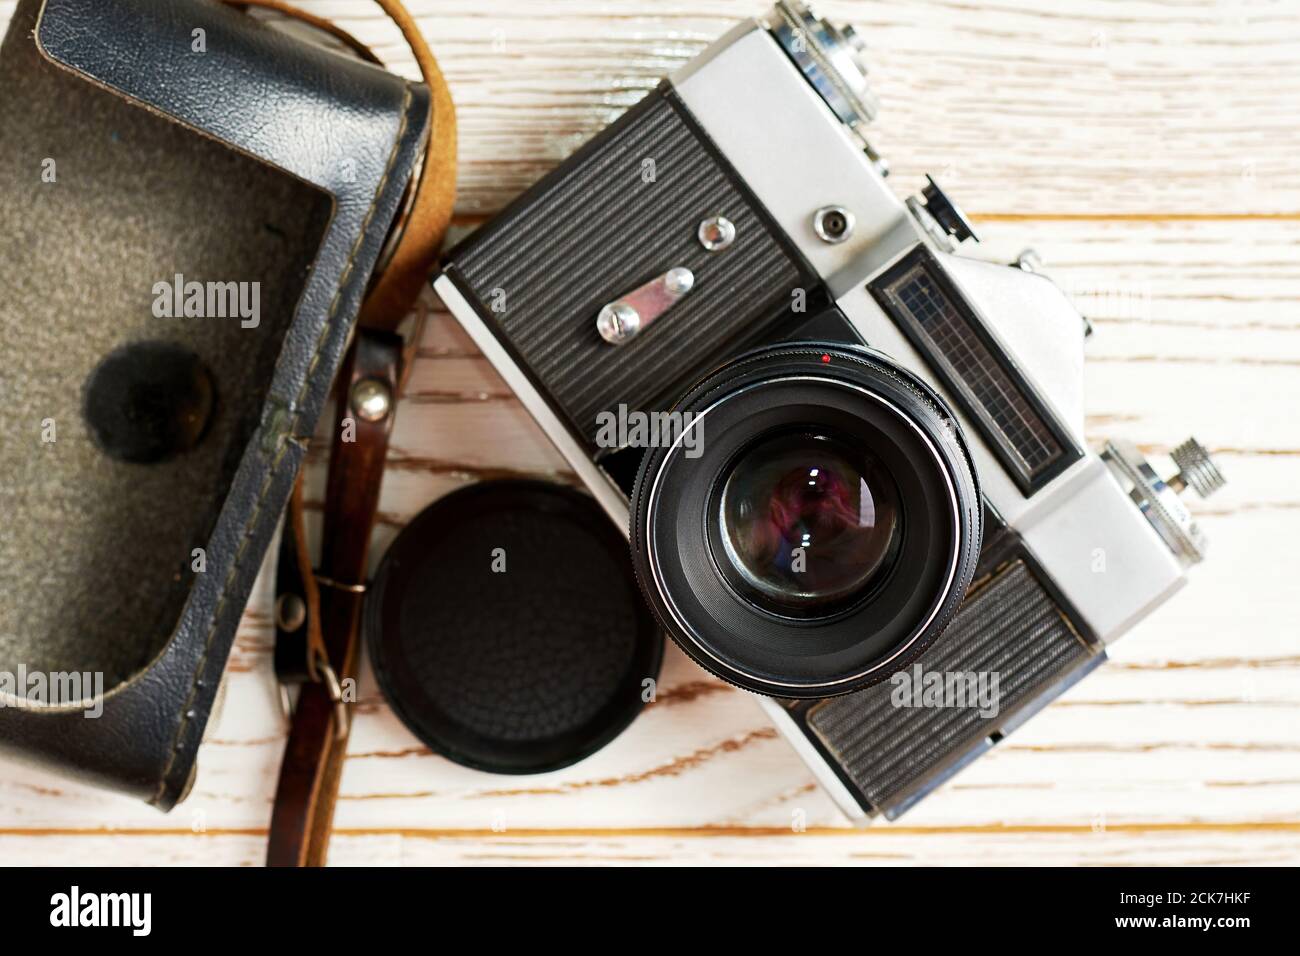 A vintage full-frame camera on the wooden surface. A revival of retro photography Stock Photo